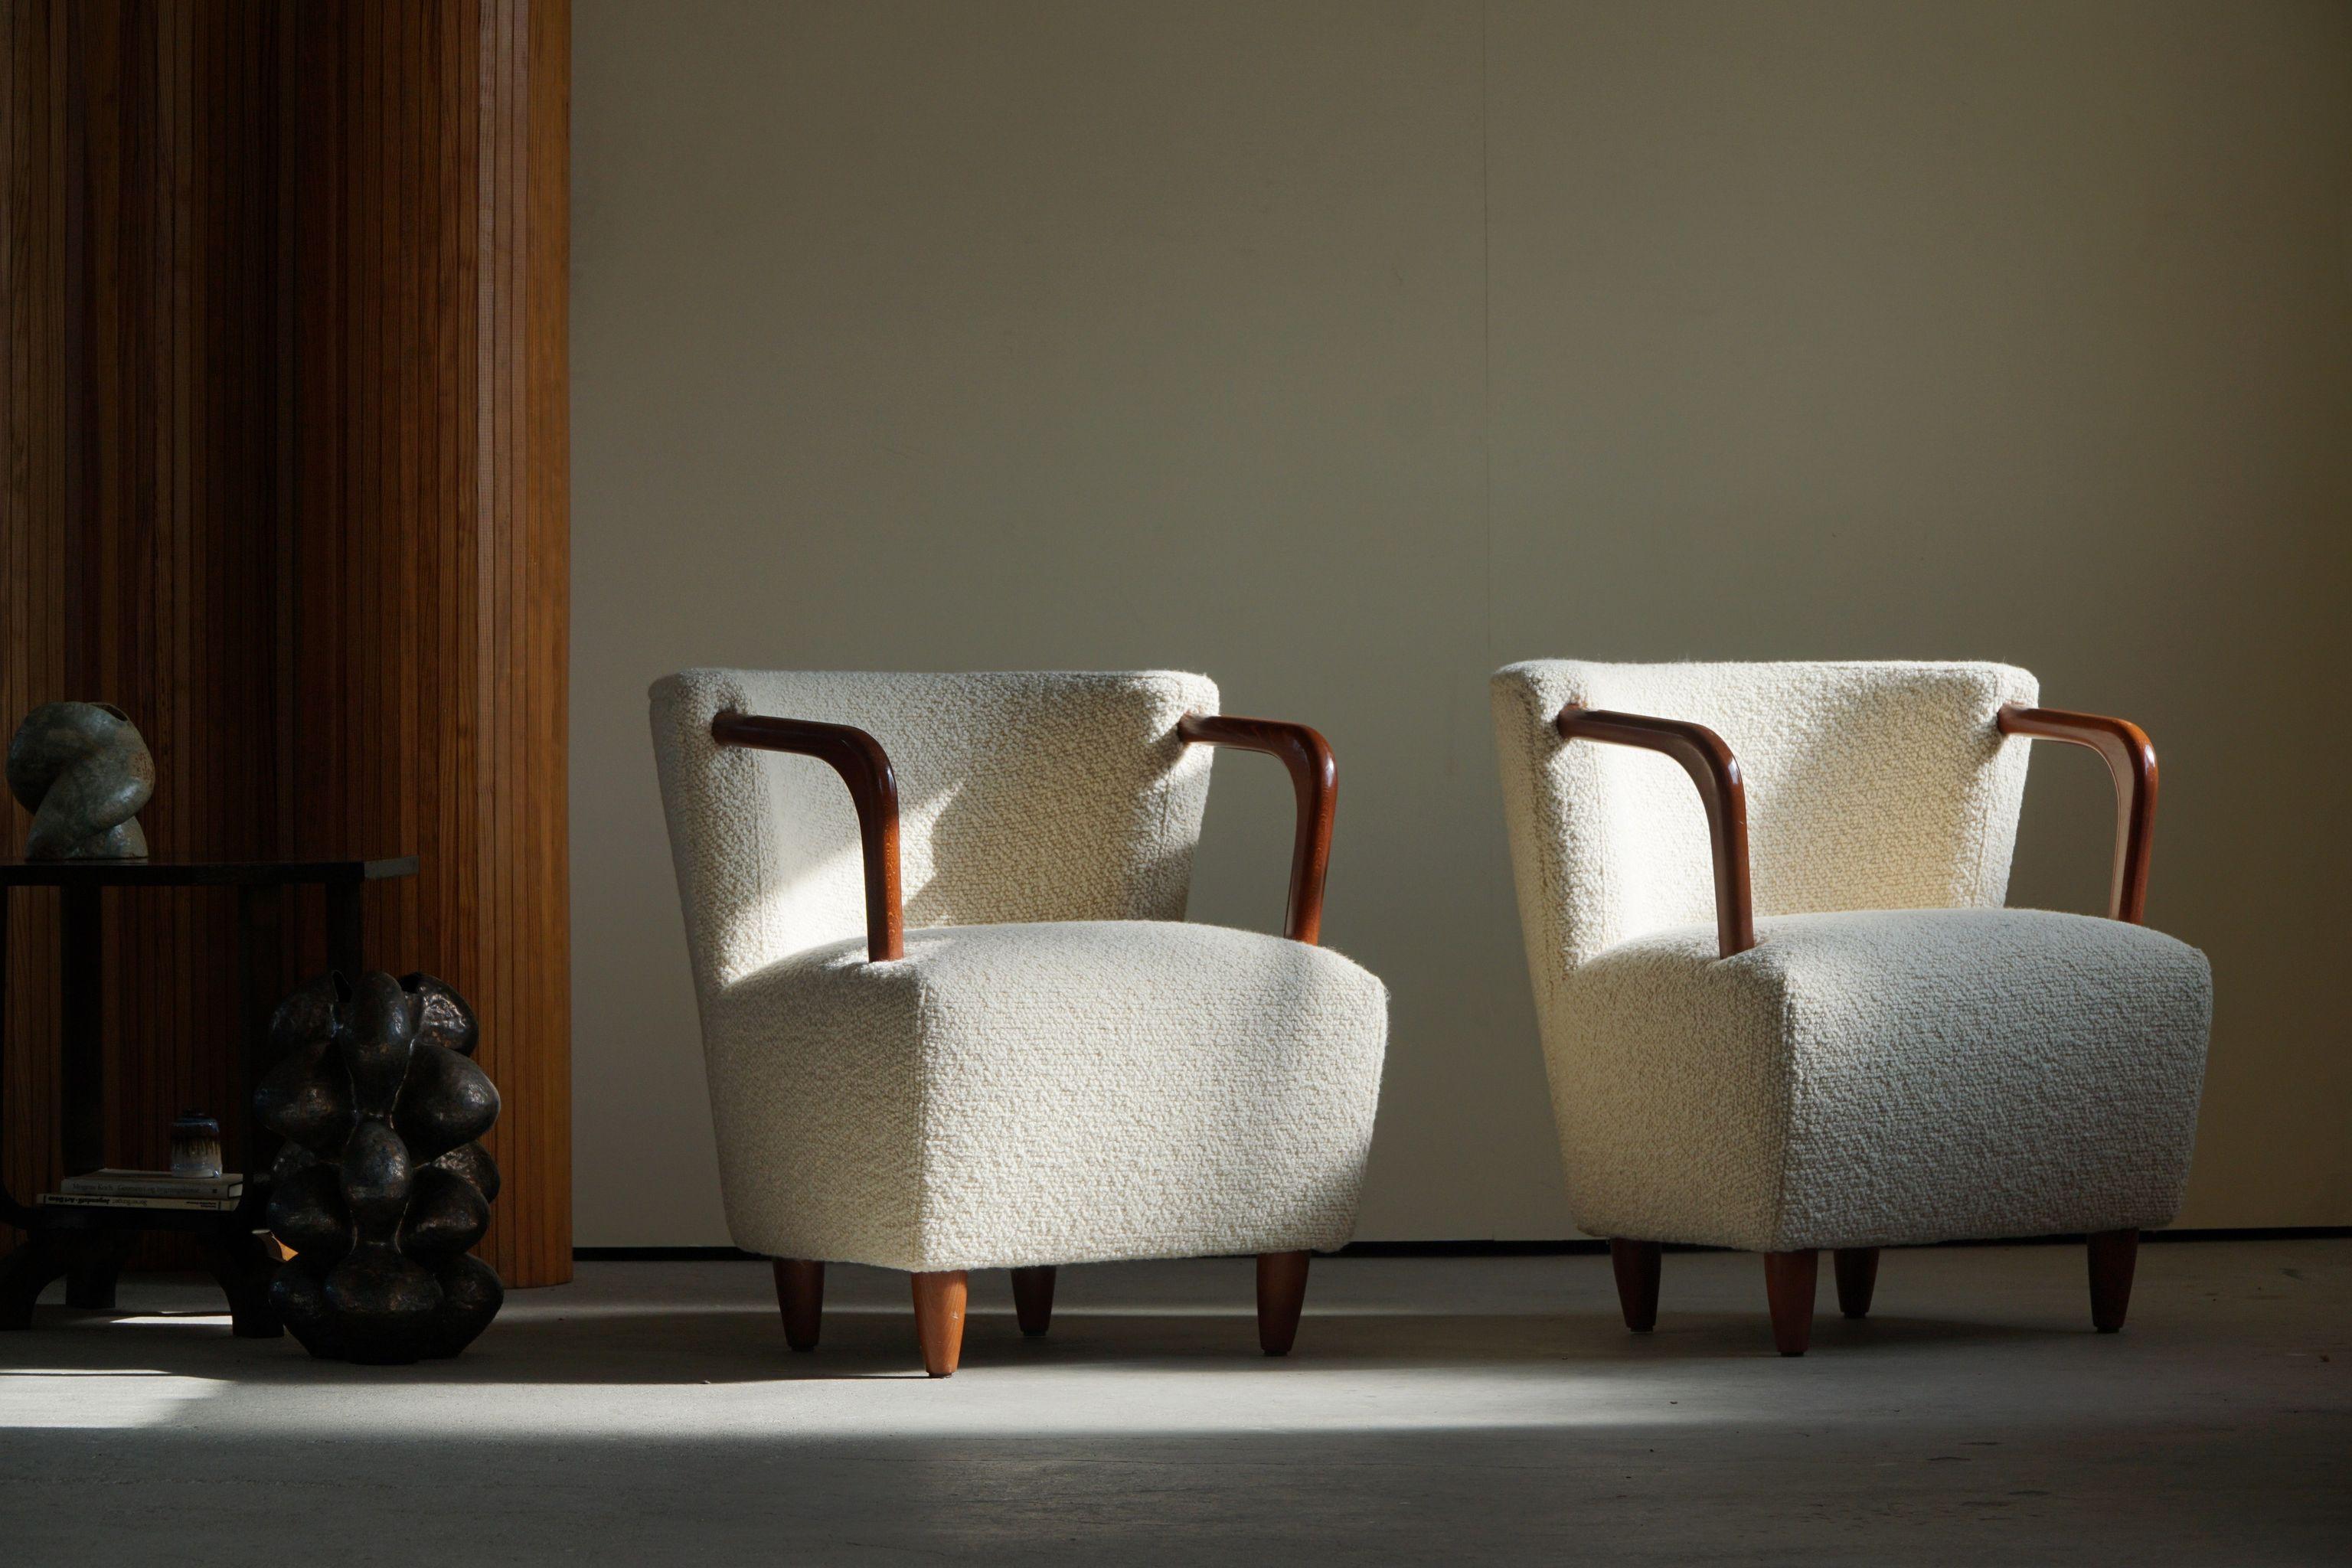 20th Century Pair of Art Deco Style Lounge Chairs in White Bouclé, by Danish Cabinetmaker